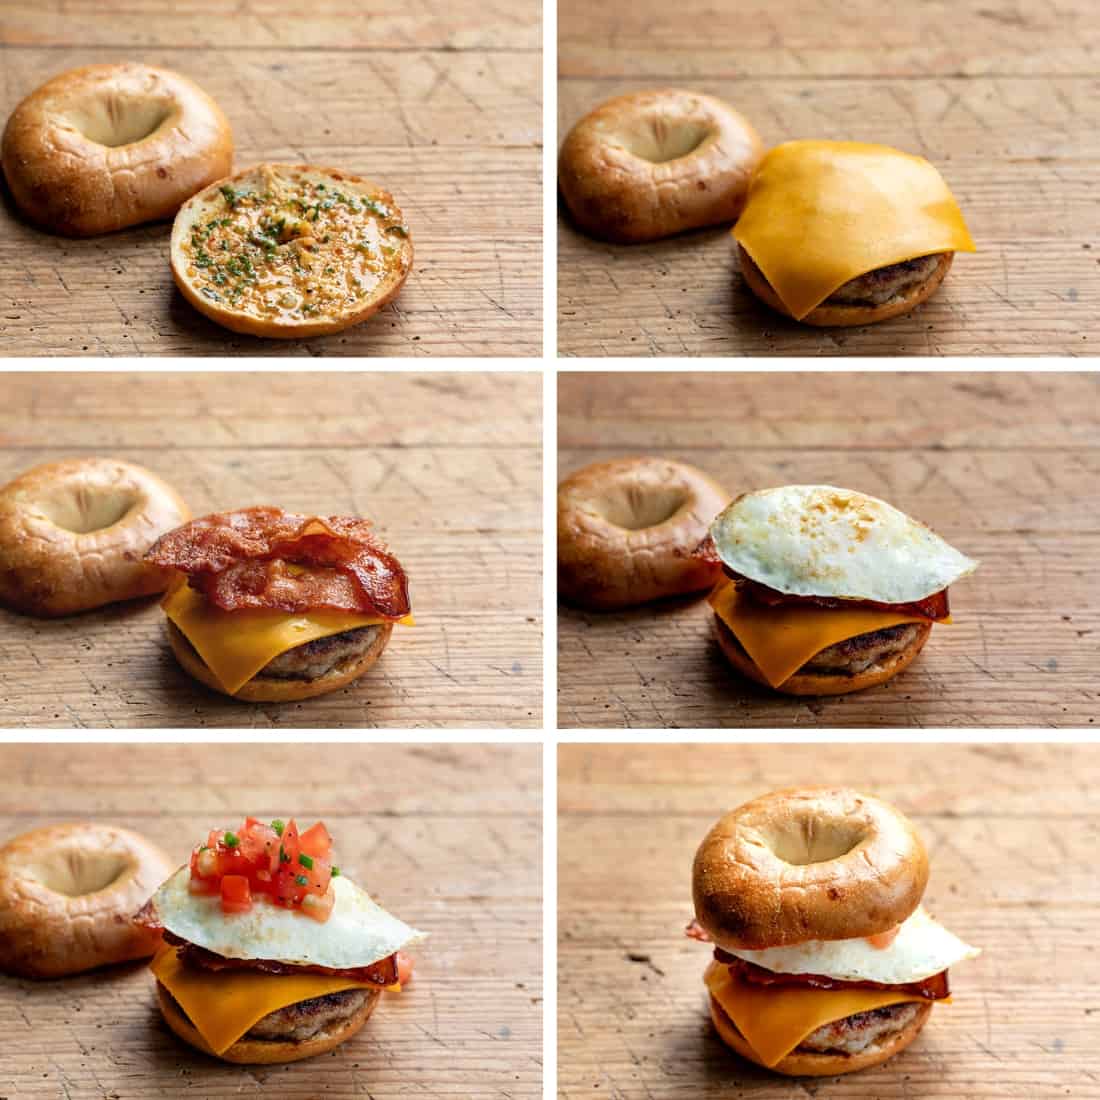 Steps for Building a Cowboy Breakfast Bagel with Sausage, Cheese, Bacon, Egg, Pico, and Top Bun.